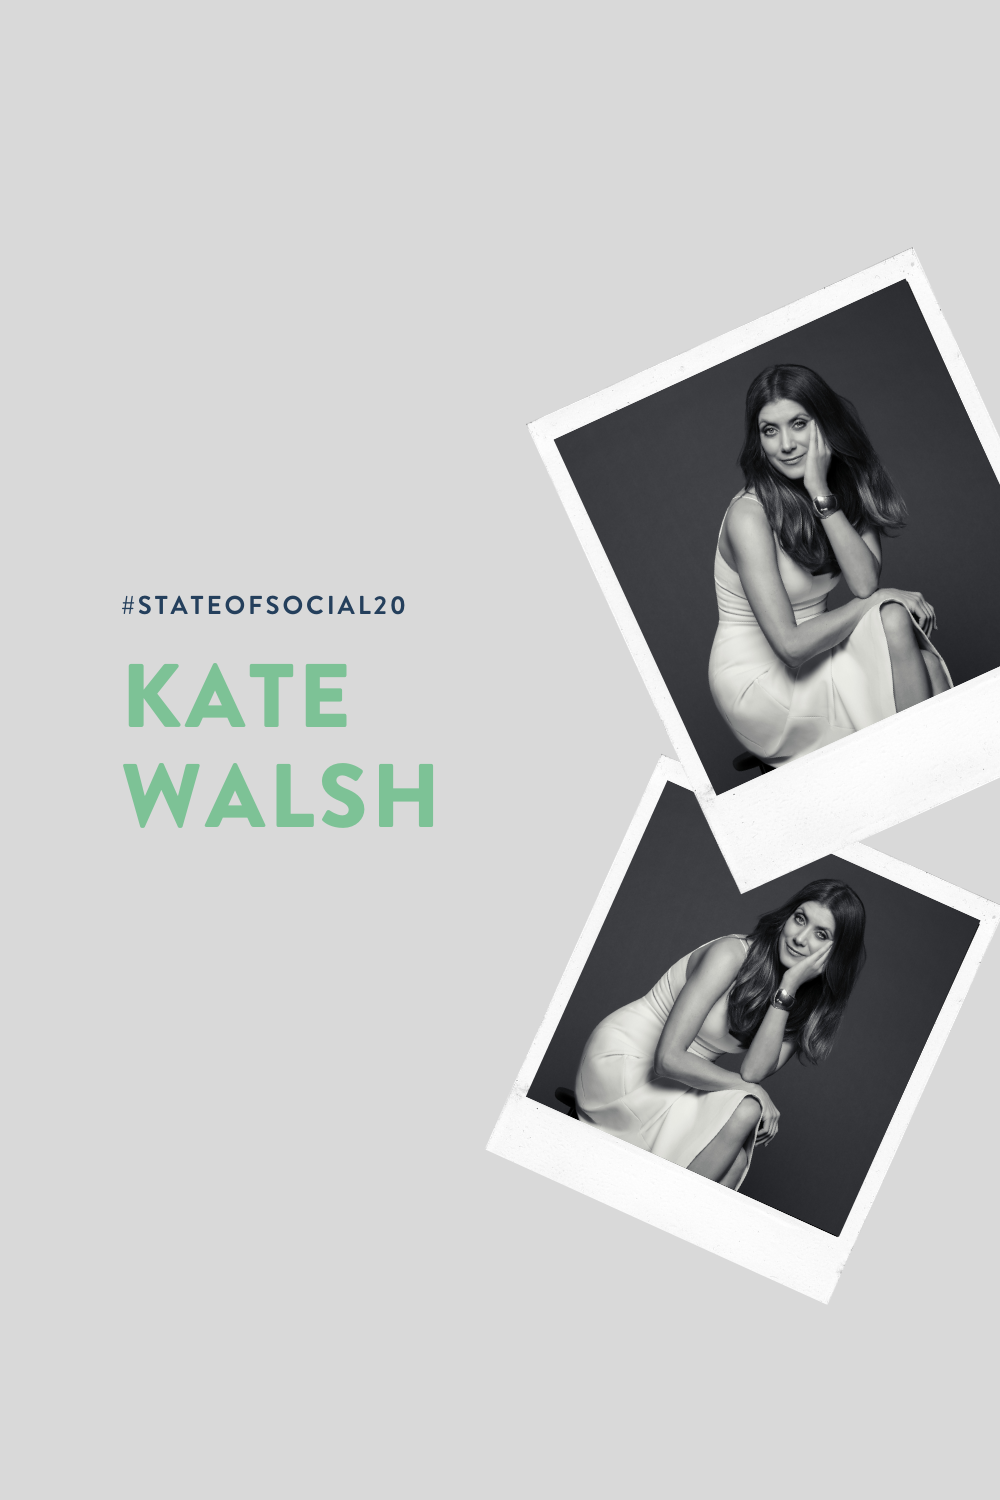 Speaker Announcement: Kate Walsh joins State of Social \'20 lineup